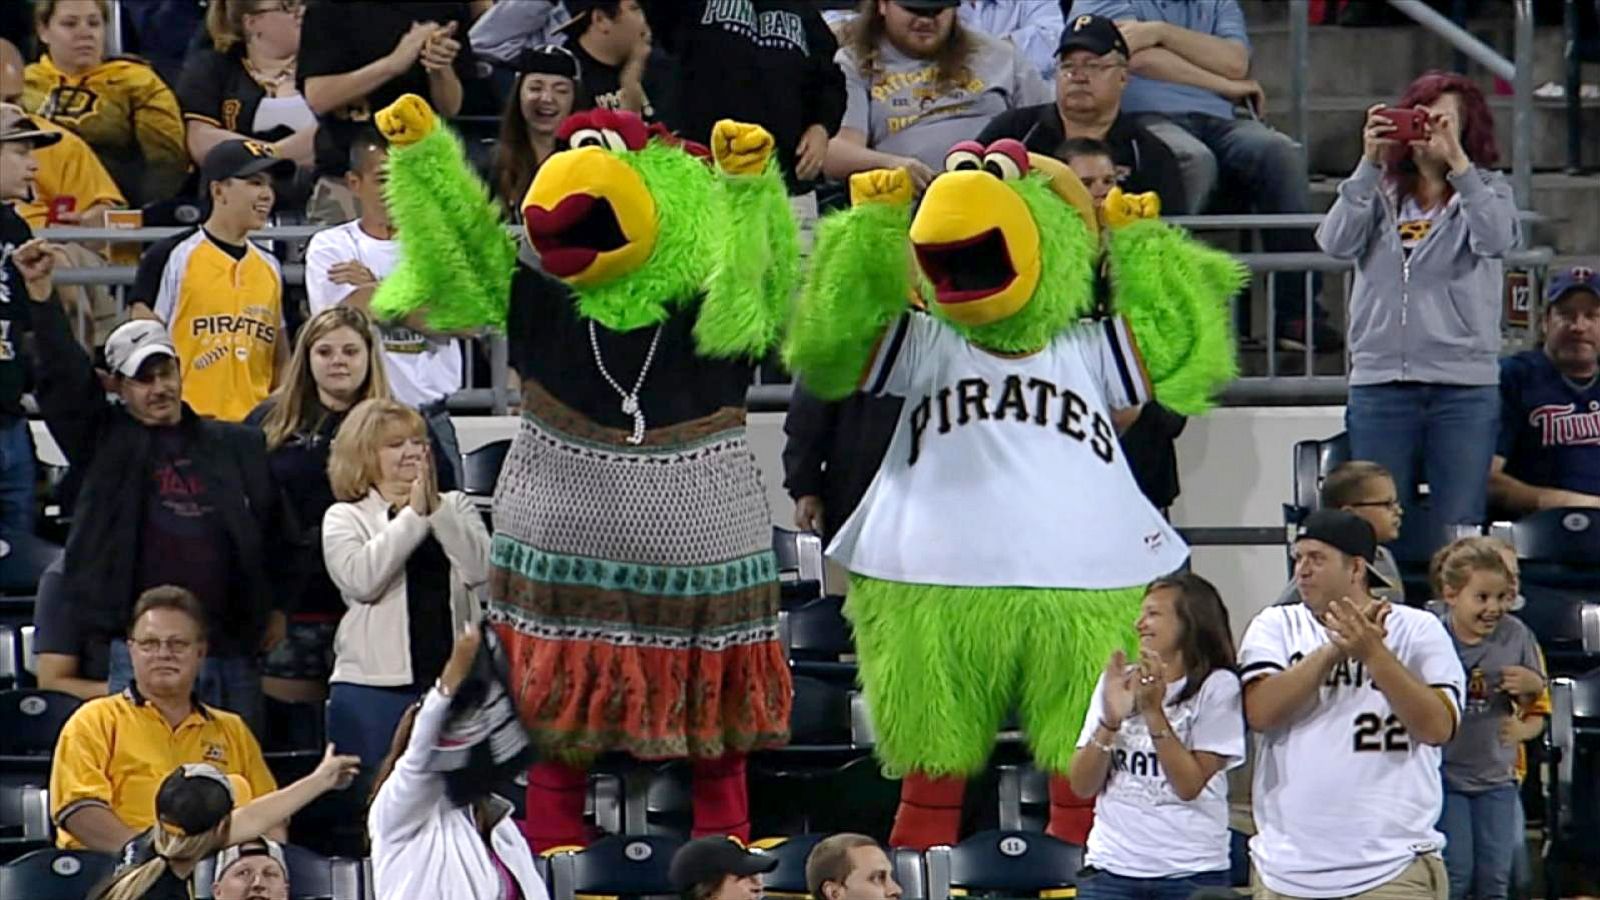 Opening Day: Quirkiest baseball mascots of all time